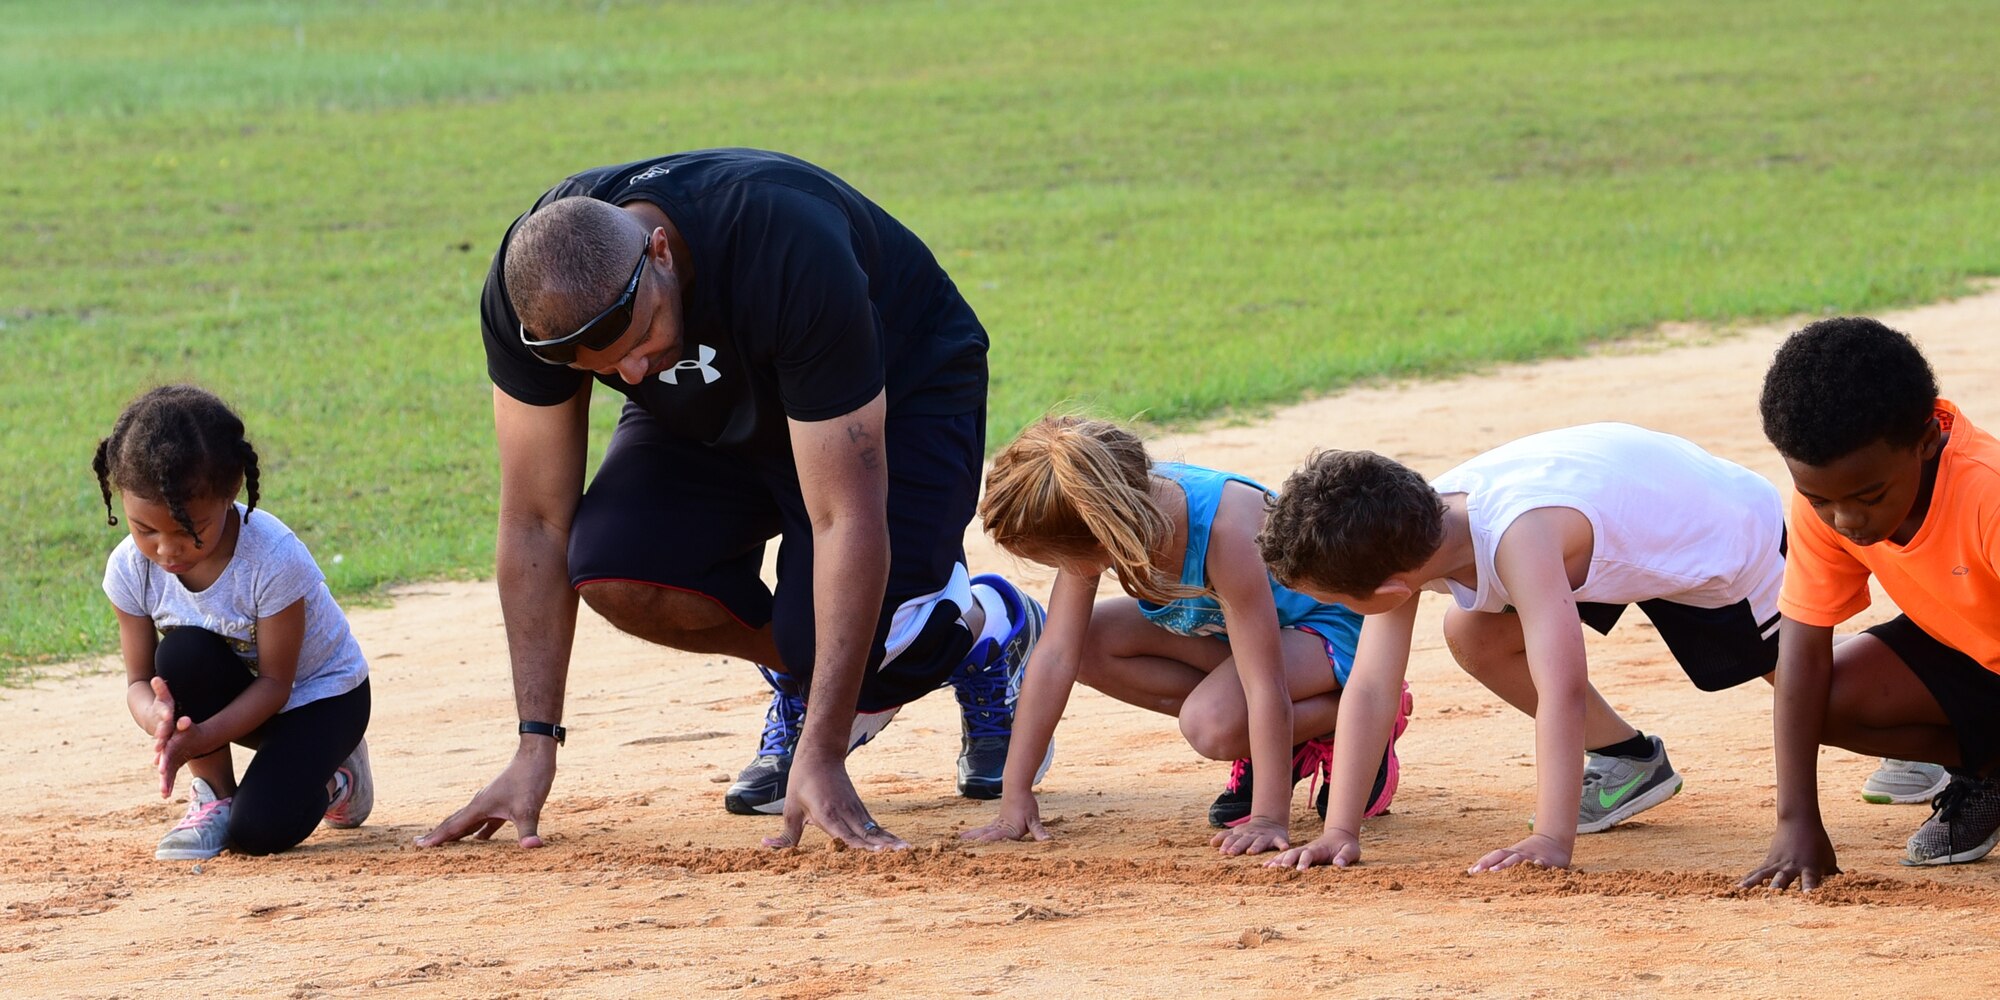 U.S. Air Force Senior Master Sgt. Antonio Mack, 325th Fighter Wing Air Forces Northern/Tyndall Command Center and 325th Fighter Wing Staff Agency superintendent, displays proper starting form to his younger athletes at Rutherford High School in Panama City, Fla., April 24, 2018. Mack coaches children from Tyndall Air Force Base and the surrounding community for track and field competitions. (U.S. Air Force photo by Senior Airman Cody R. Miller/Released)